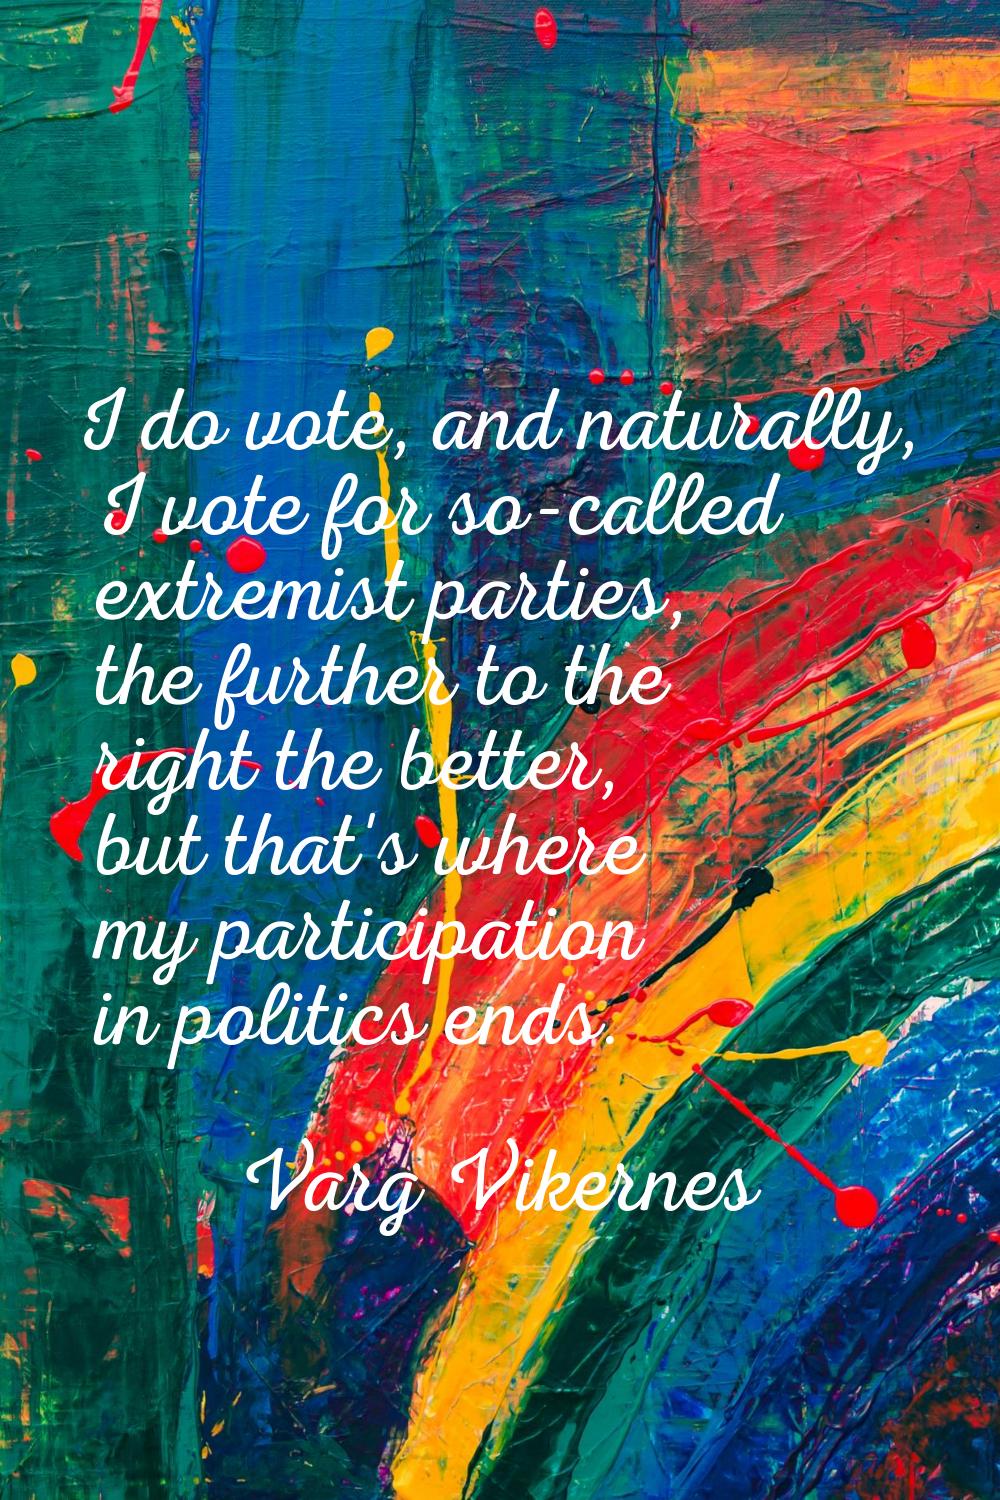 I do vote, and naturally, I vote for so-called extremist parties, the further to the right the bett